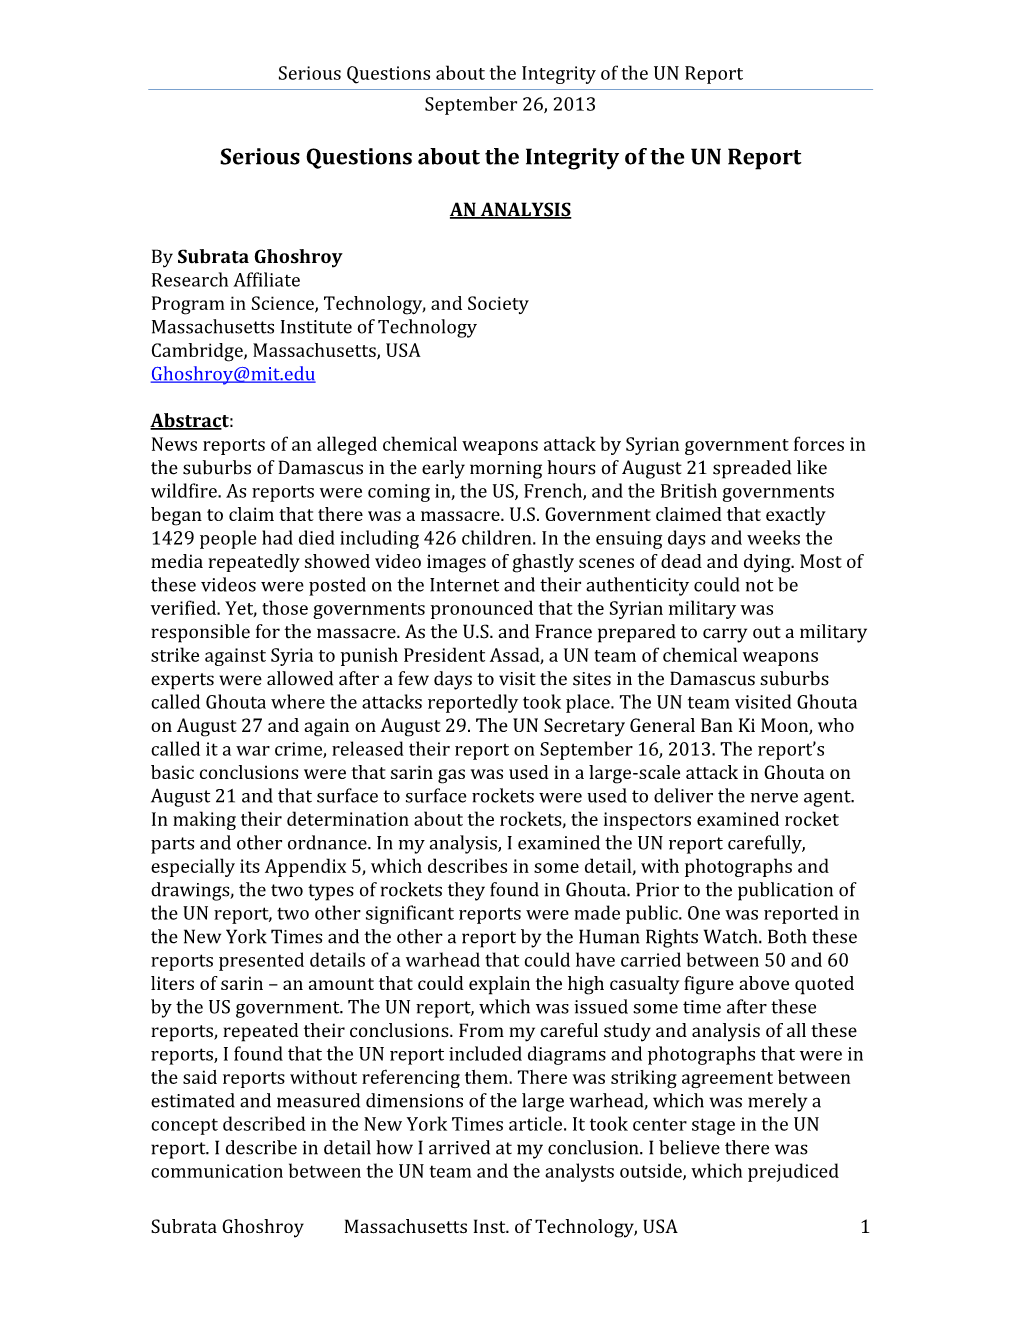 Serious Questions About the Integrity of the UN Report September 26, 2013